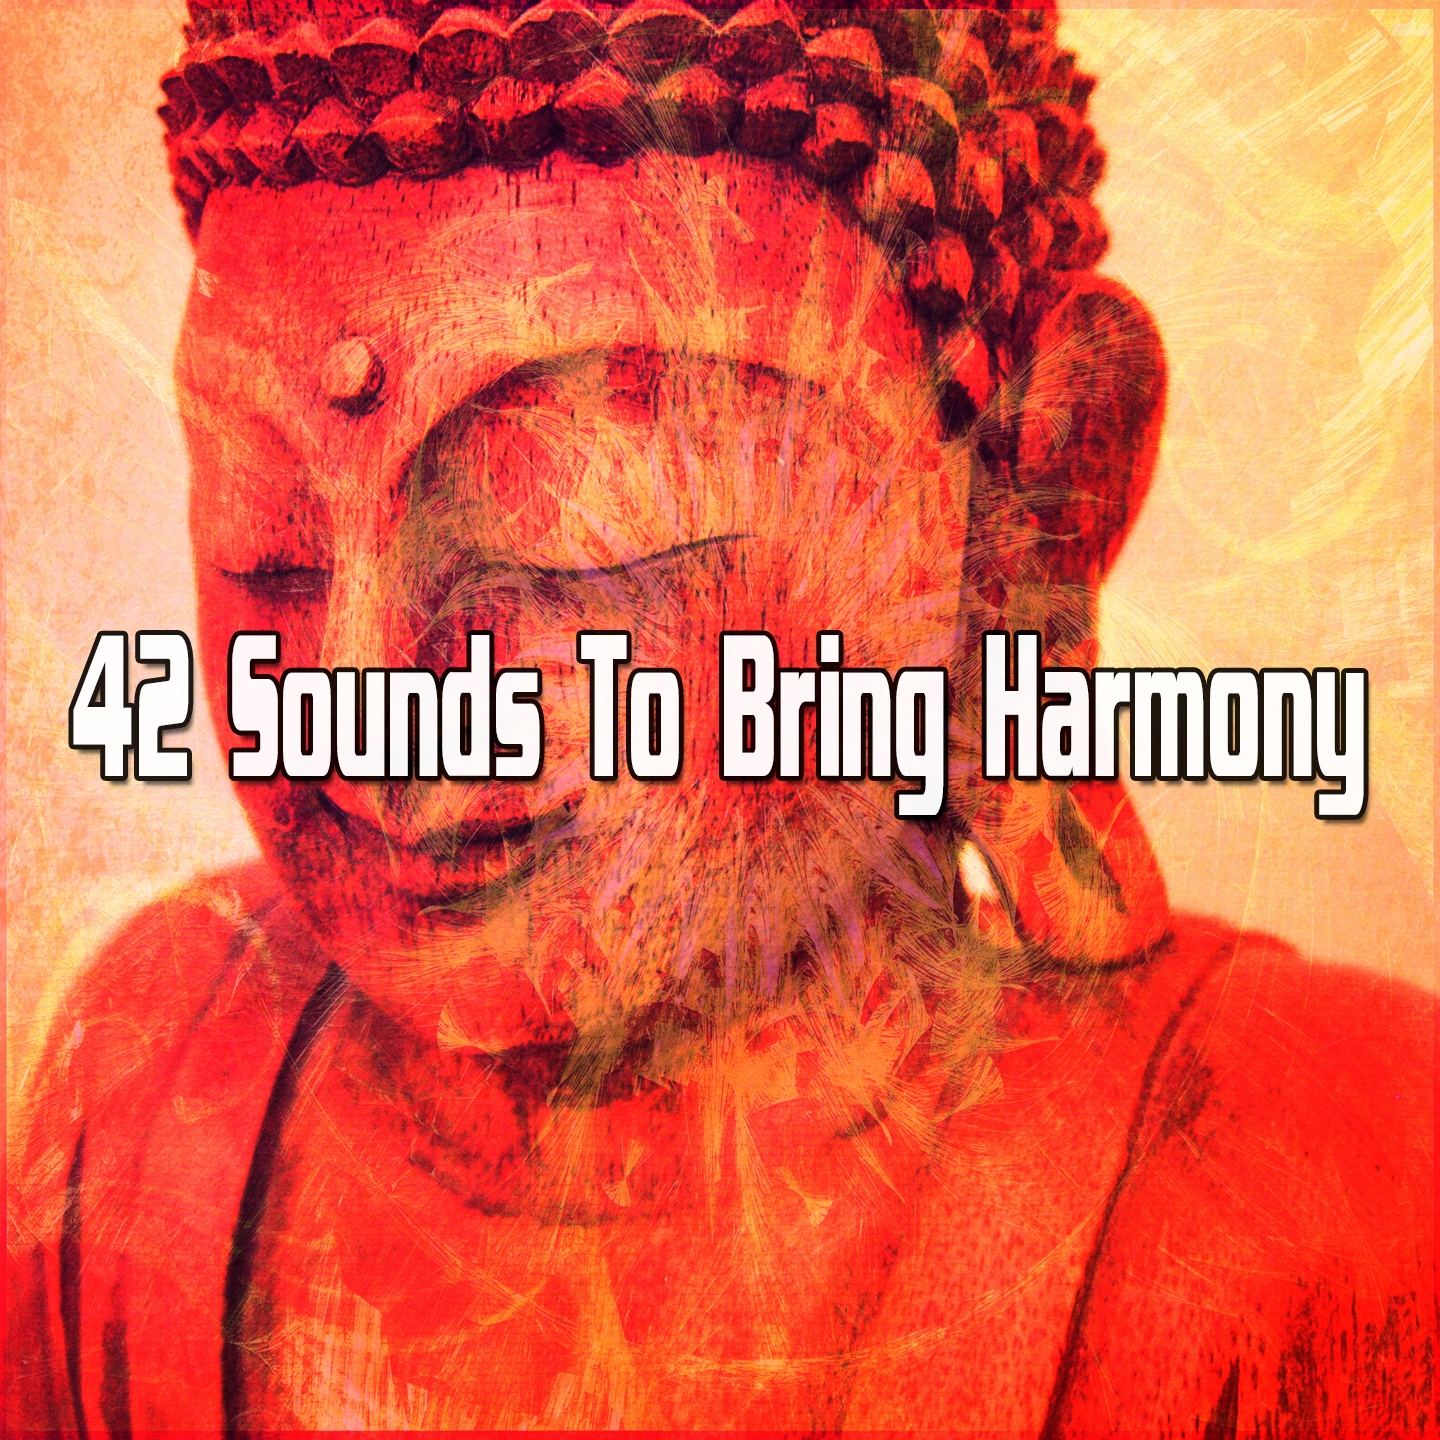 42 Sounds To Bring Harmony